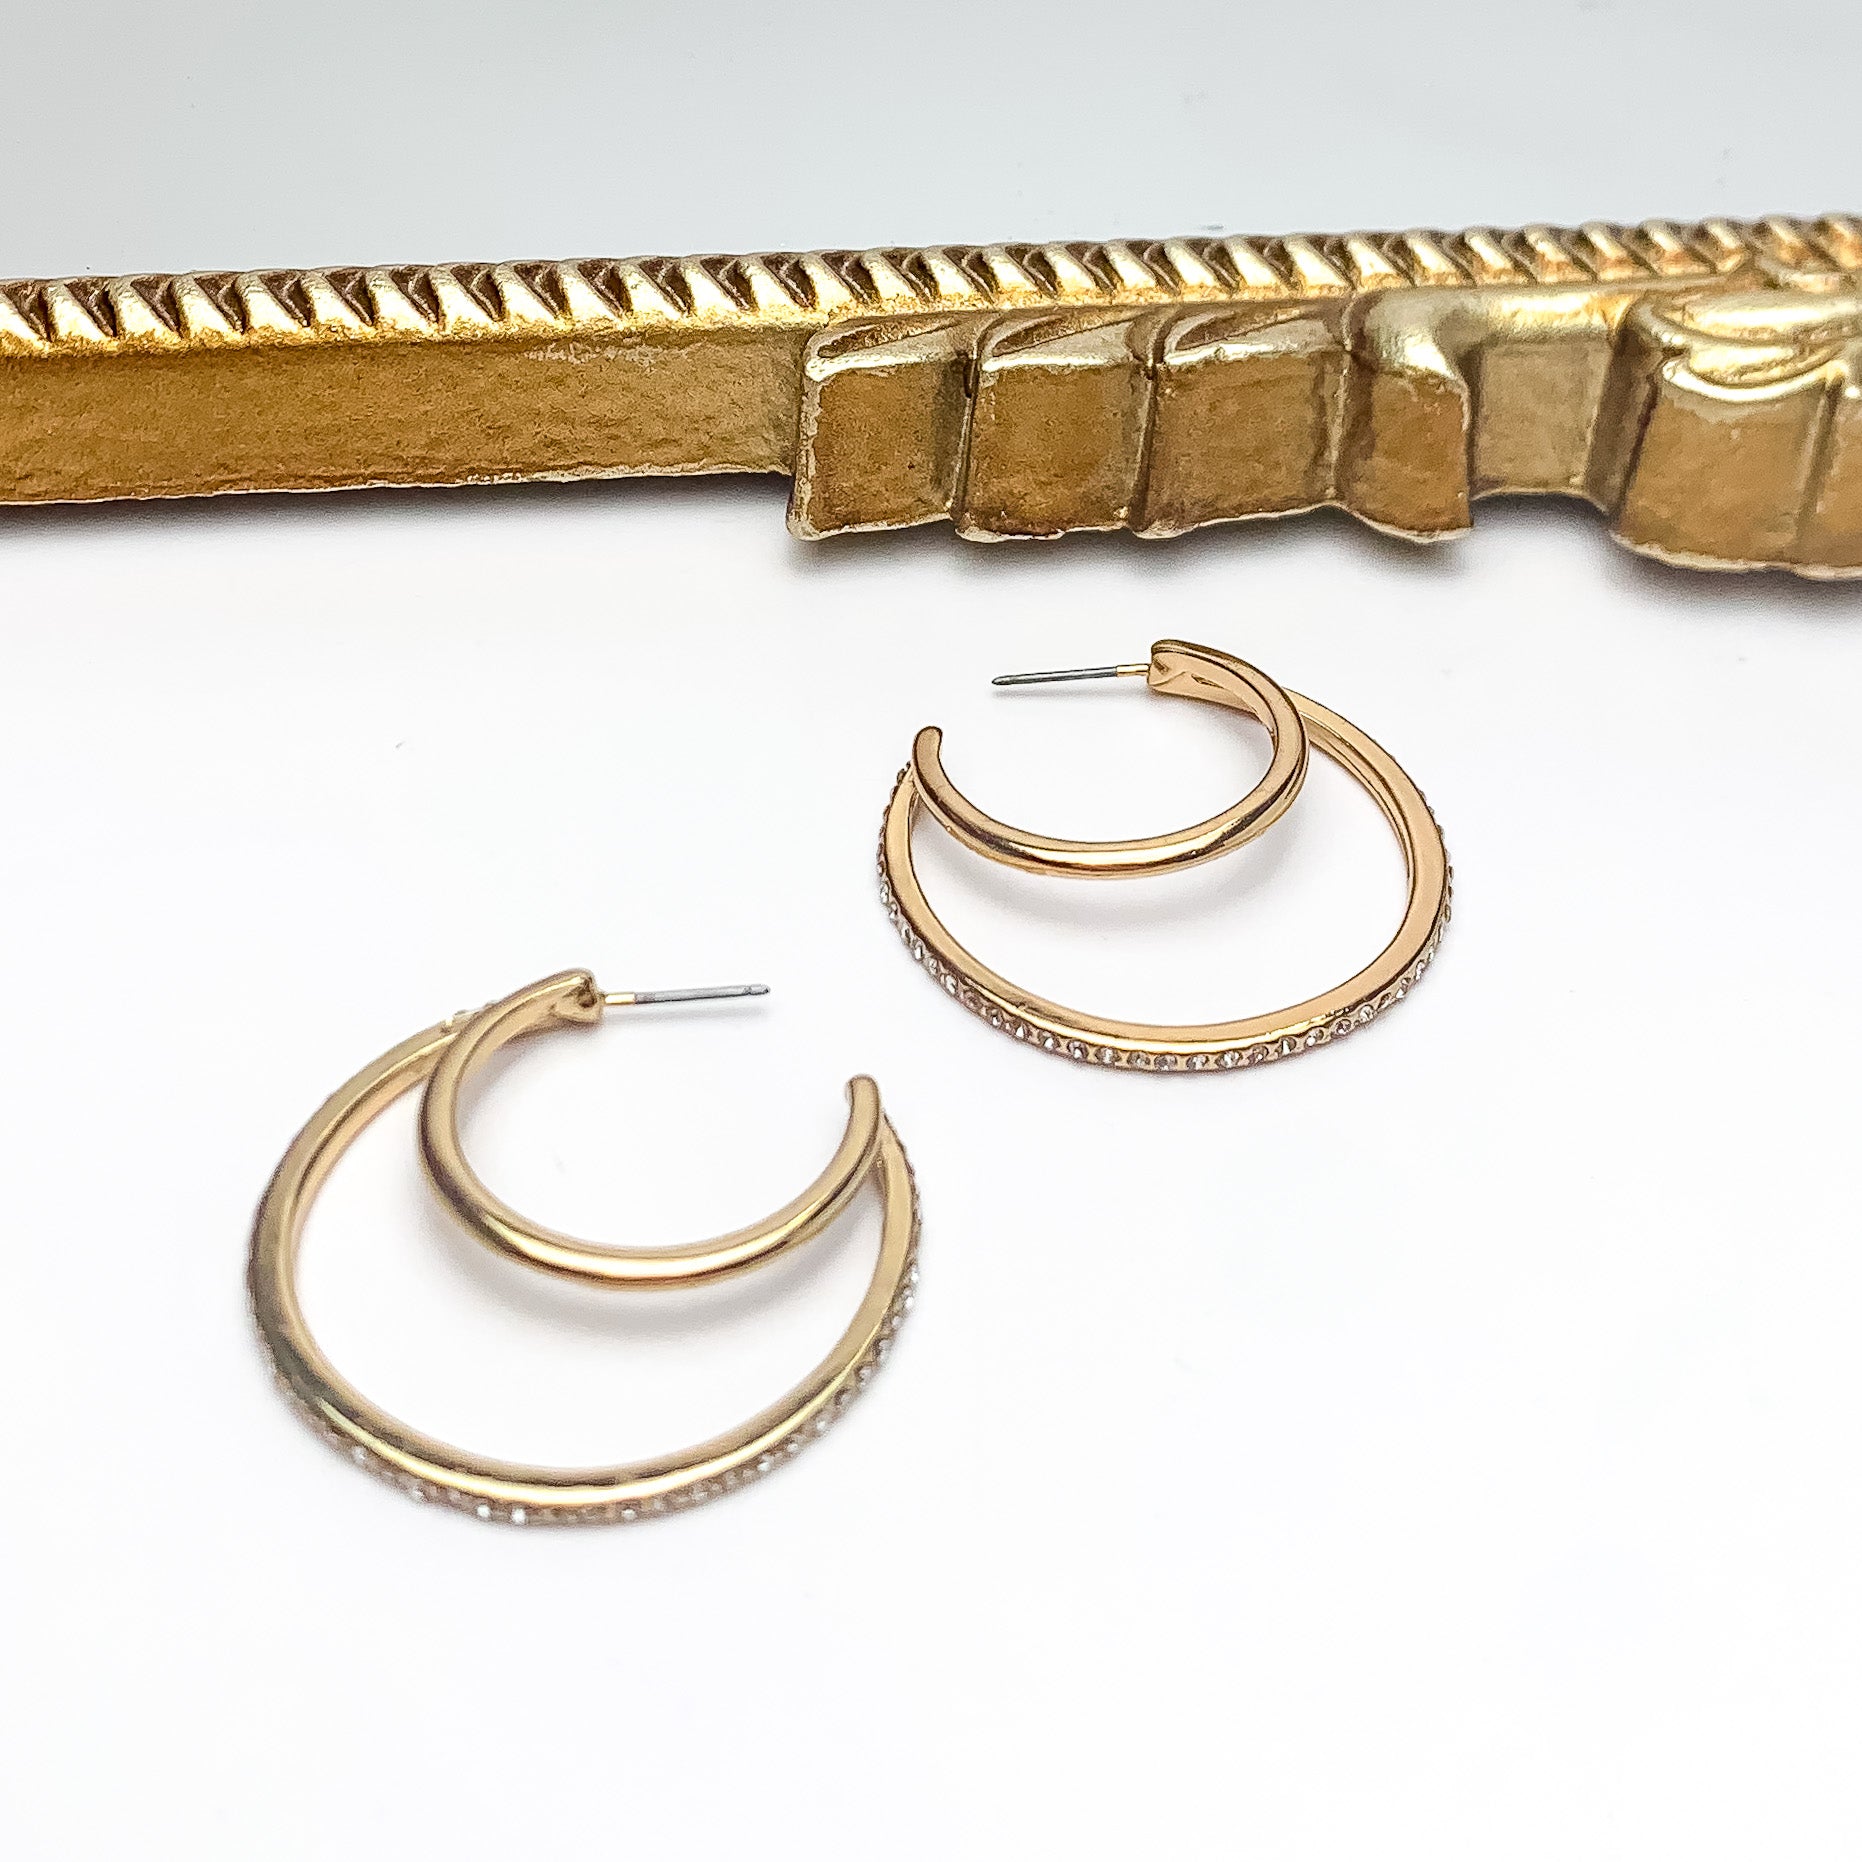 Midnight Hour Gold Tone Hoop Earrings With Clear Crystals. Pictured on a white background with a gold frame above the earrings.